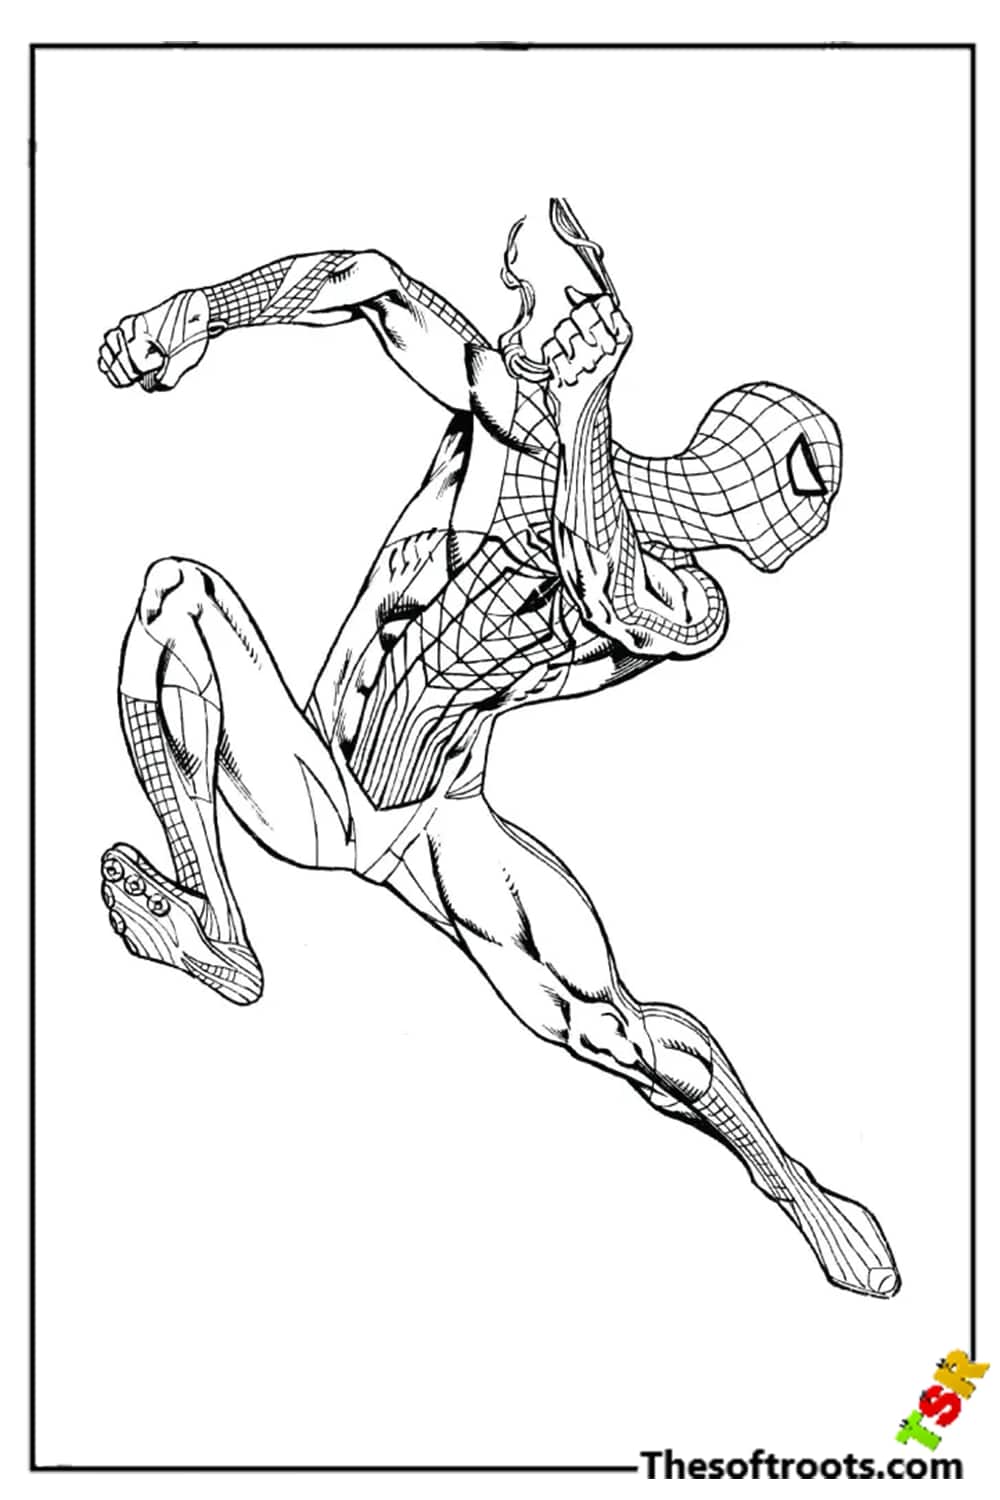 Fighting Spiderman coloring pages